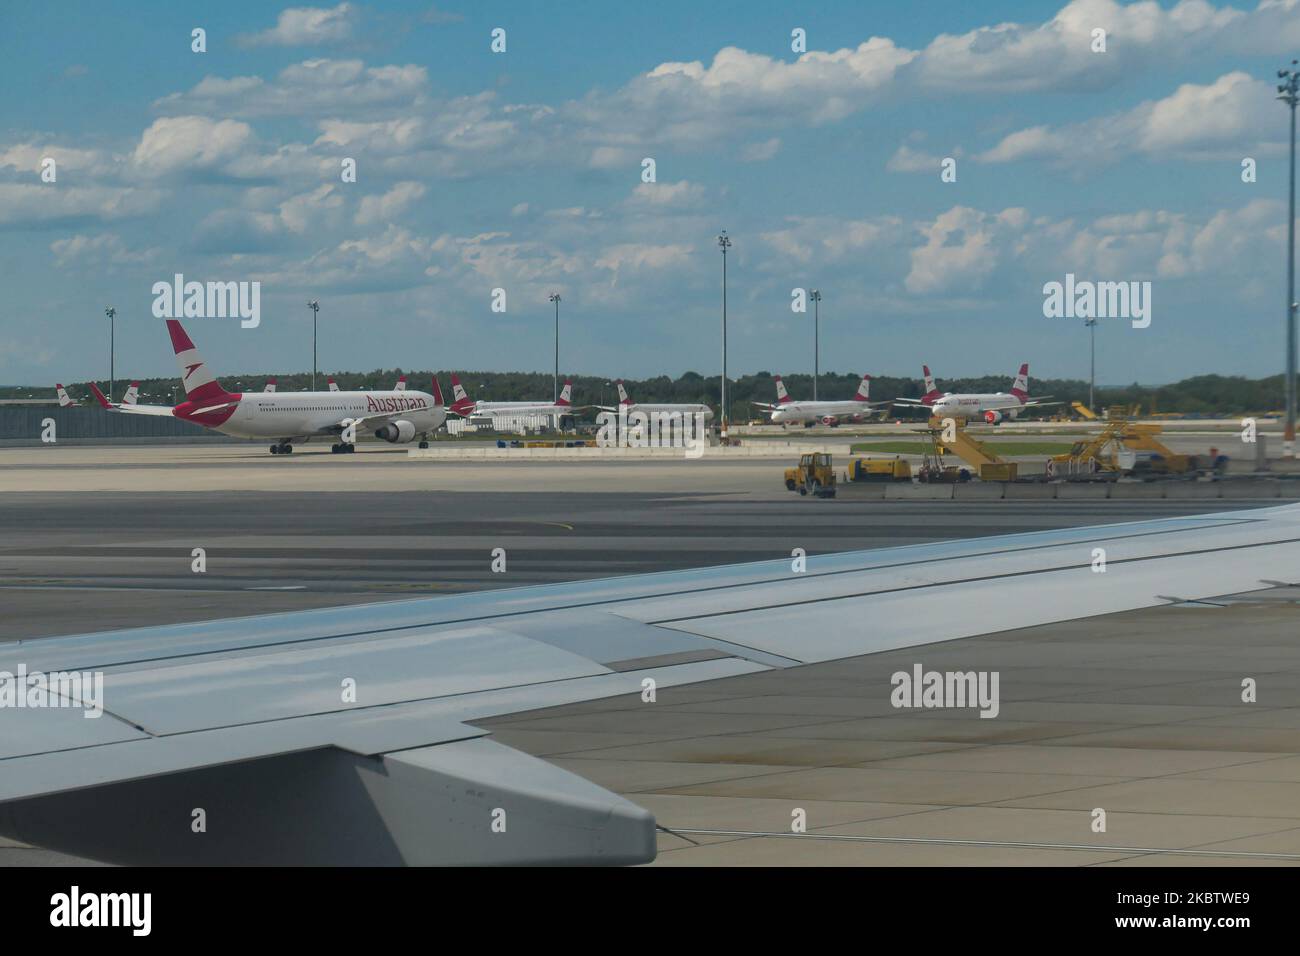 The grounded fleet of Austrian Airlines OS AUA, the flag carrier of Austria subsidiary of Lufthansa Group and member of Star Alliance as seen in Vienna International Airport Schwechat VIE, Austria, on July 15, 2020. Boeing and Airbus aircraft with the engines covered are seen parked on the apron tarmac during the Coronavirus Covid-19 Pandemic era as air travel traffic was reduced because of travel restrictions and traveling ban or lockdown quarantine measures. On July 1, Austria issues travel warning for six Balkan states countries, Serbia, Montenegro, Bosnia Herzegovina, North Macedonia, Alba Stock Photo